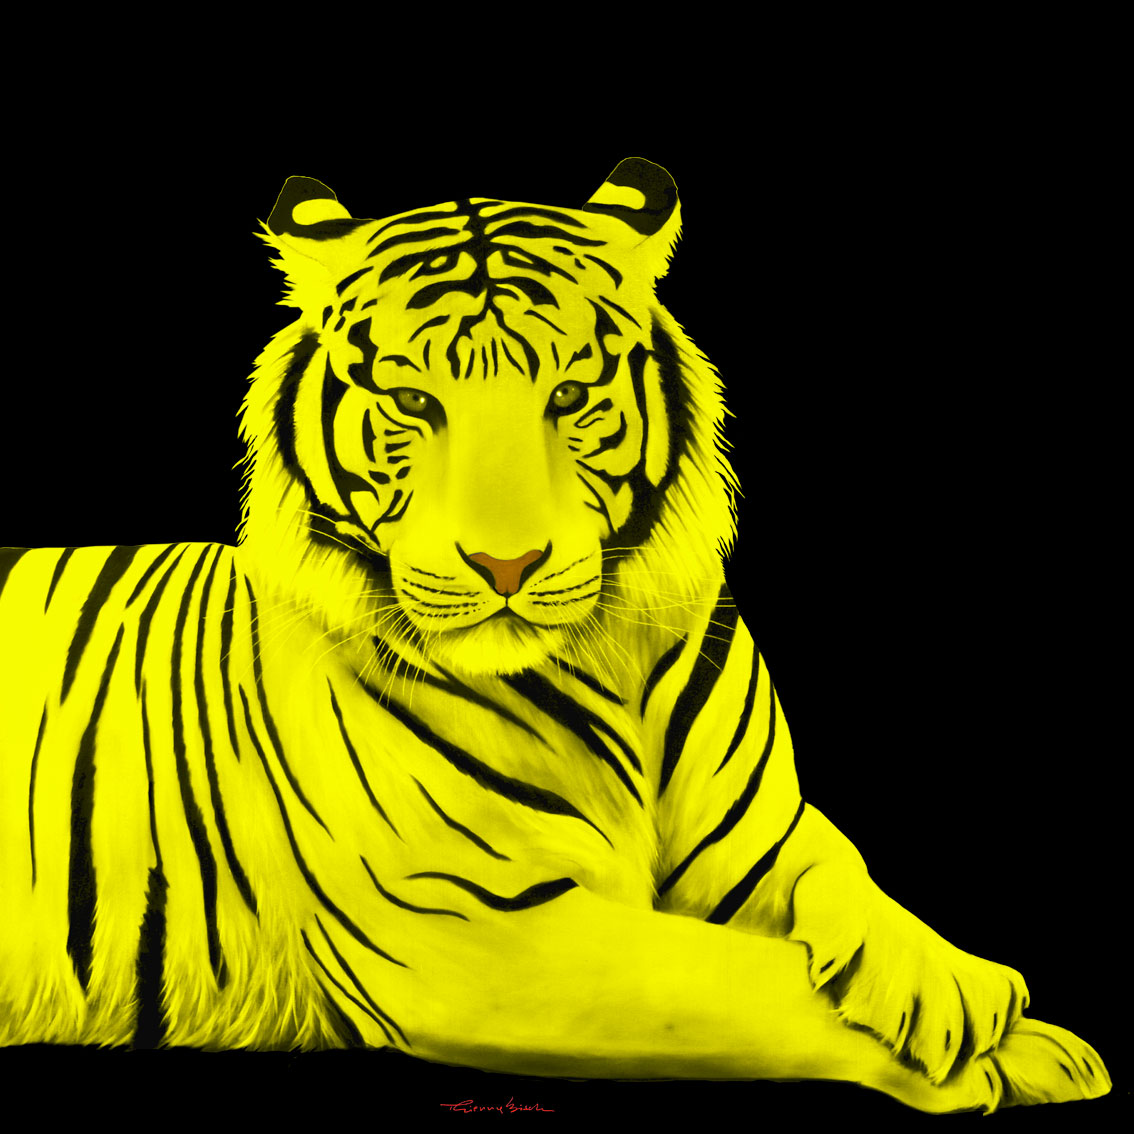 TIGER YELLOW TIGER Thierry Bisch Contemporary painter animals painting art  nature biodiversity conservation 